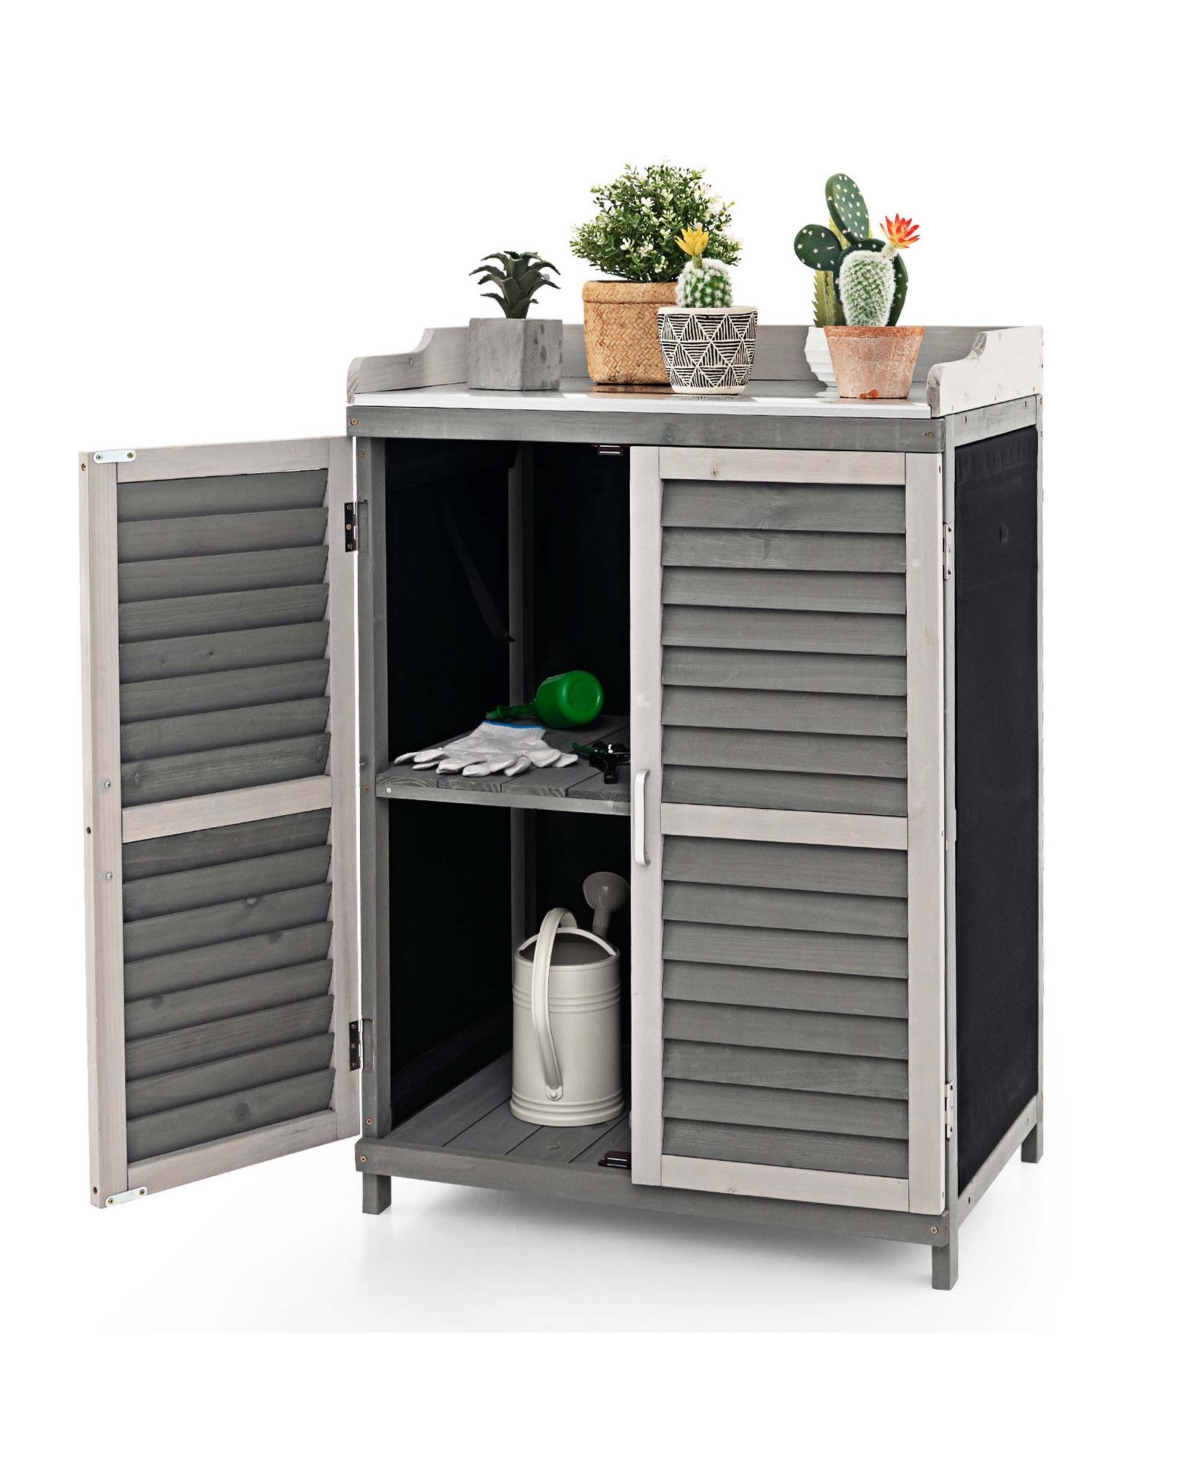 Outdoor Potting Bench Table, Garden Storage Cabinet with Metal Tabletop - Grey